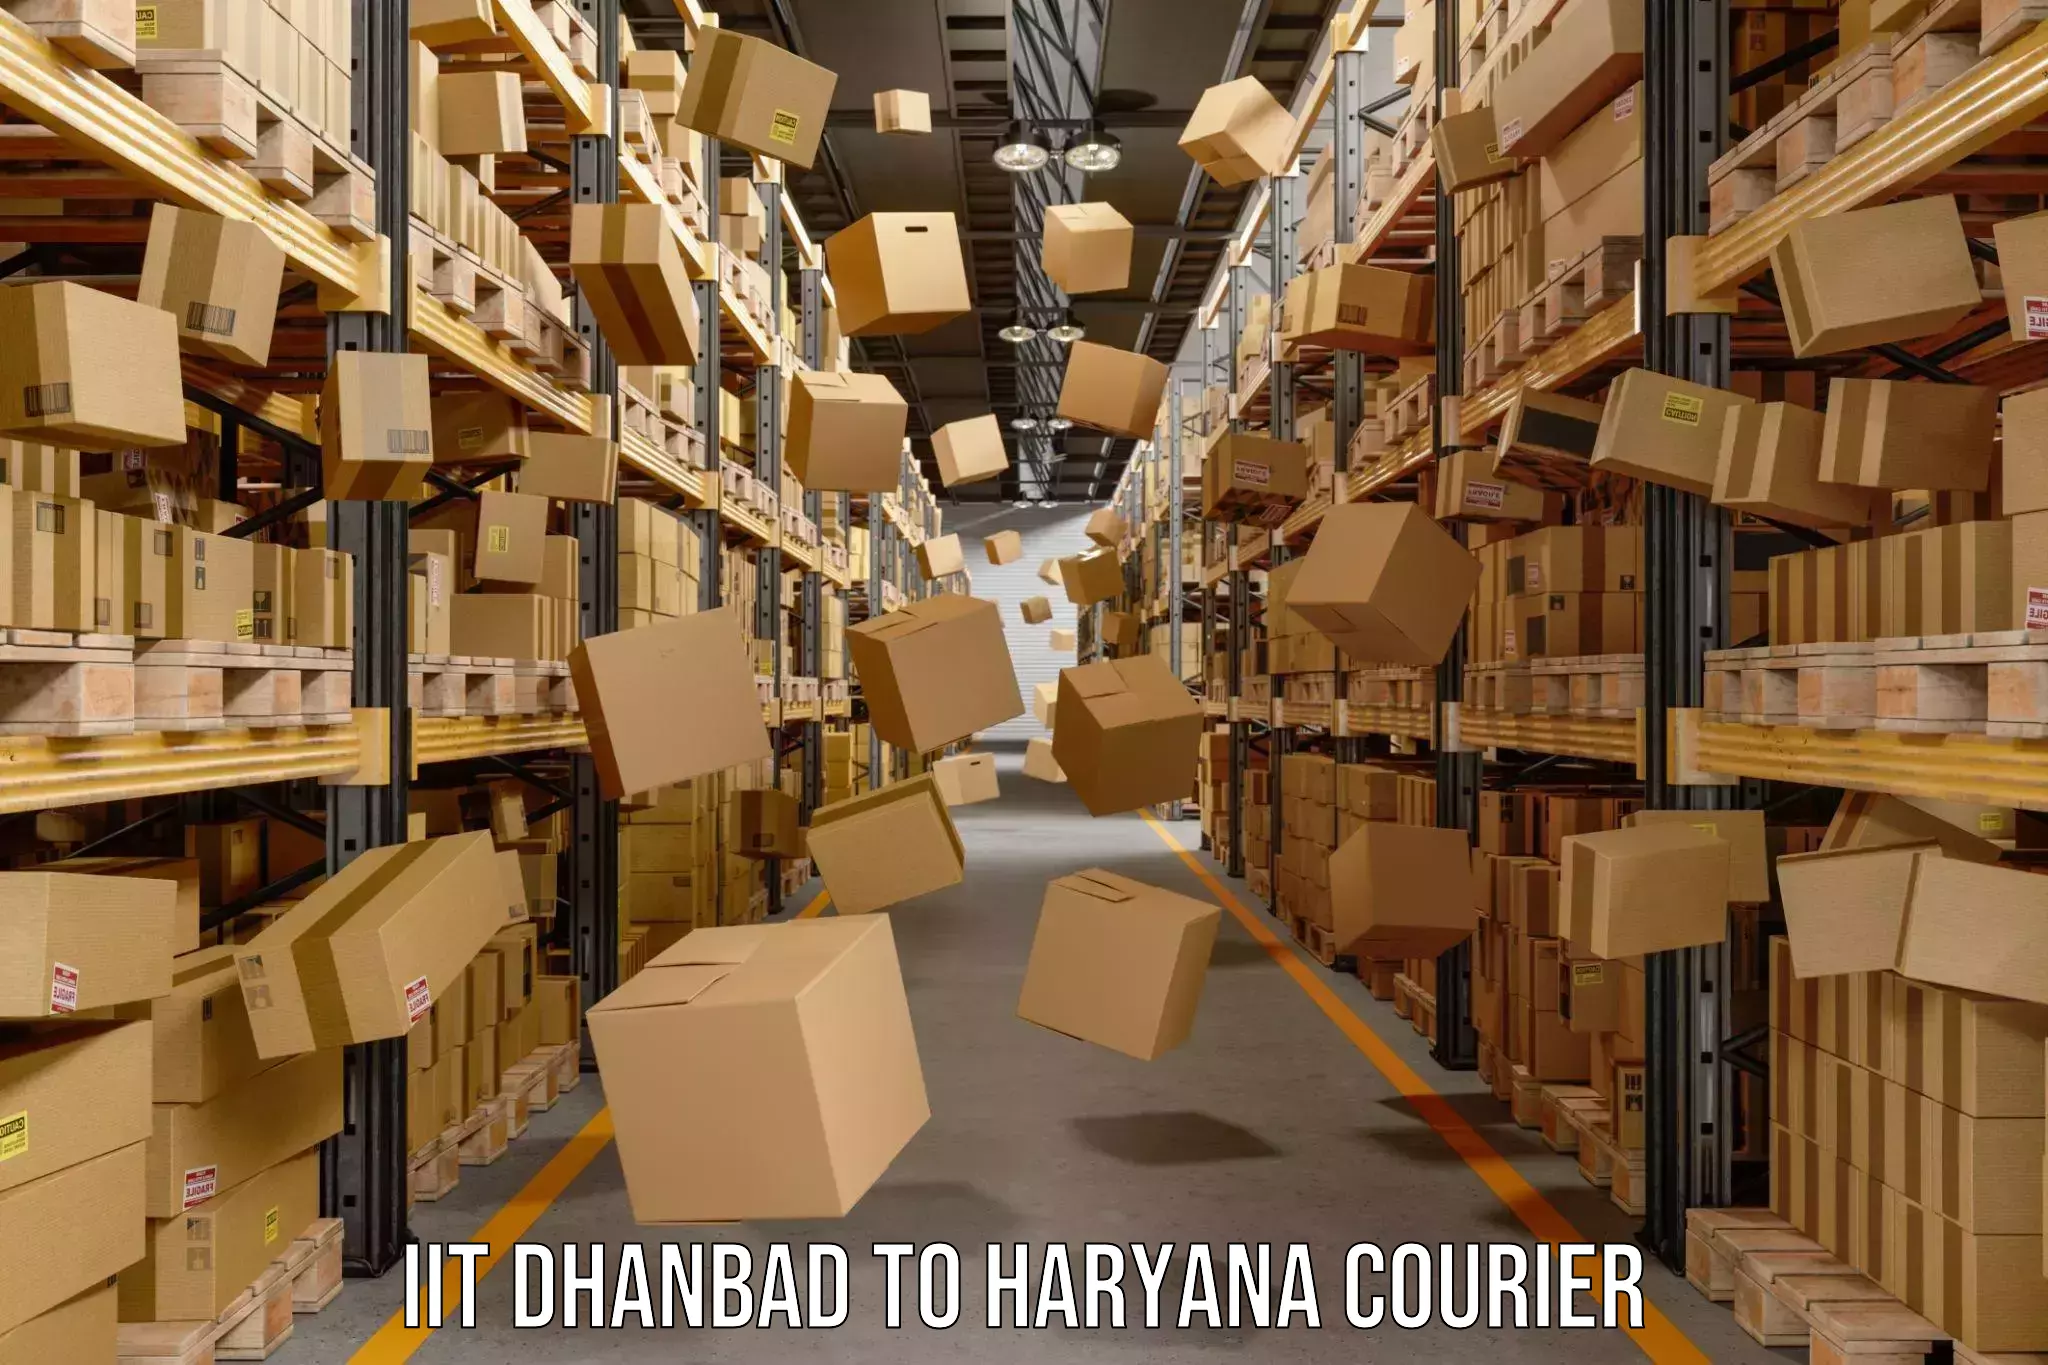 Efficient courier operations IIT Dhanbad to Haryana